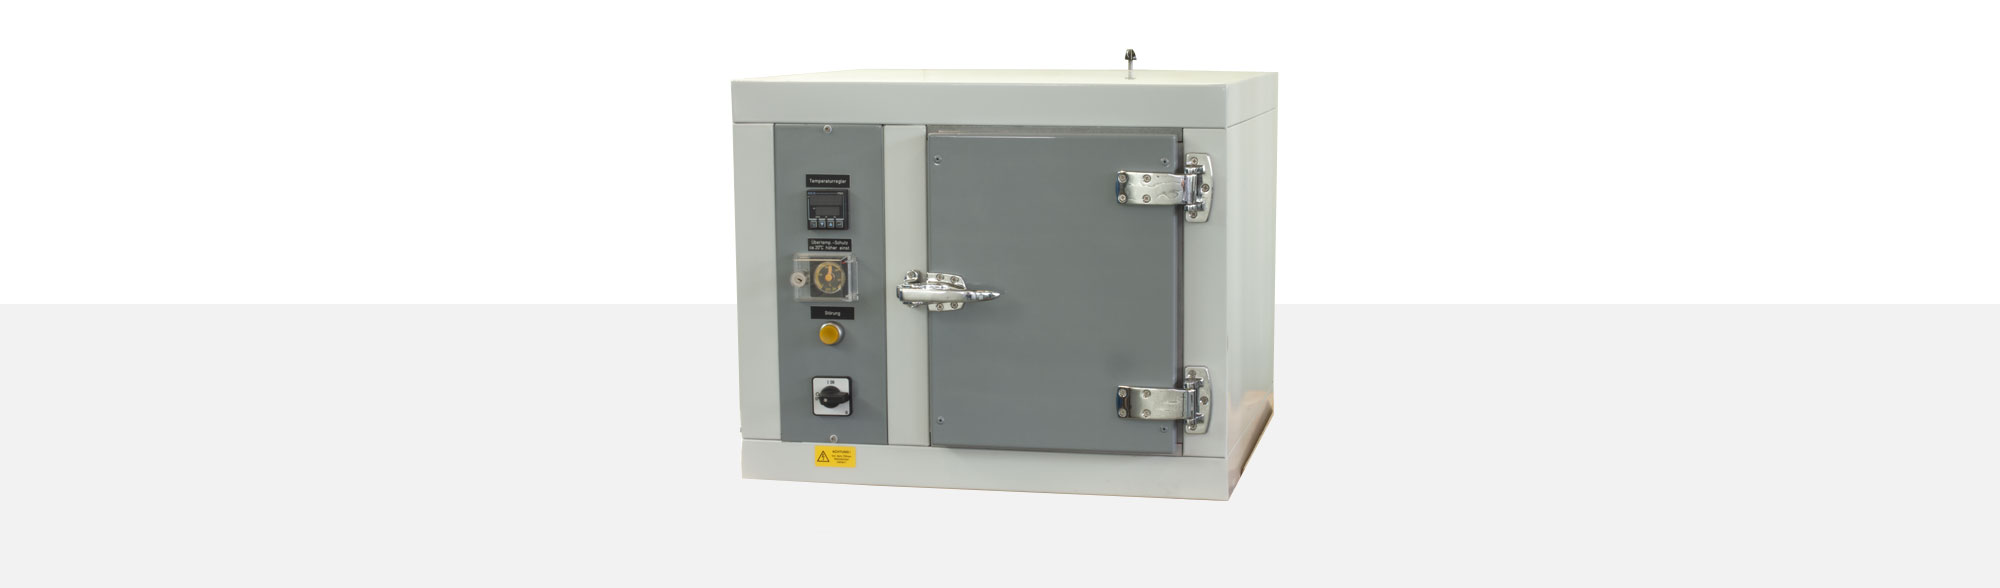 Laboratory Ovens find their application within research, development, medicine, microbiology and much more industrial sectors. Examples are incubators, steaming cabinets or circulation cabinets. As multi-chamber oven they are used as well within chemistry